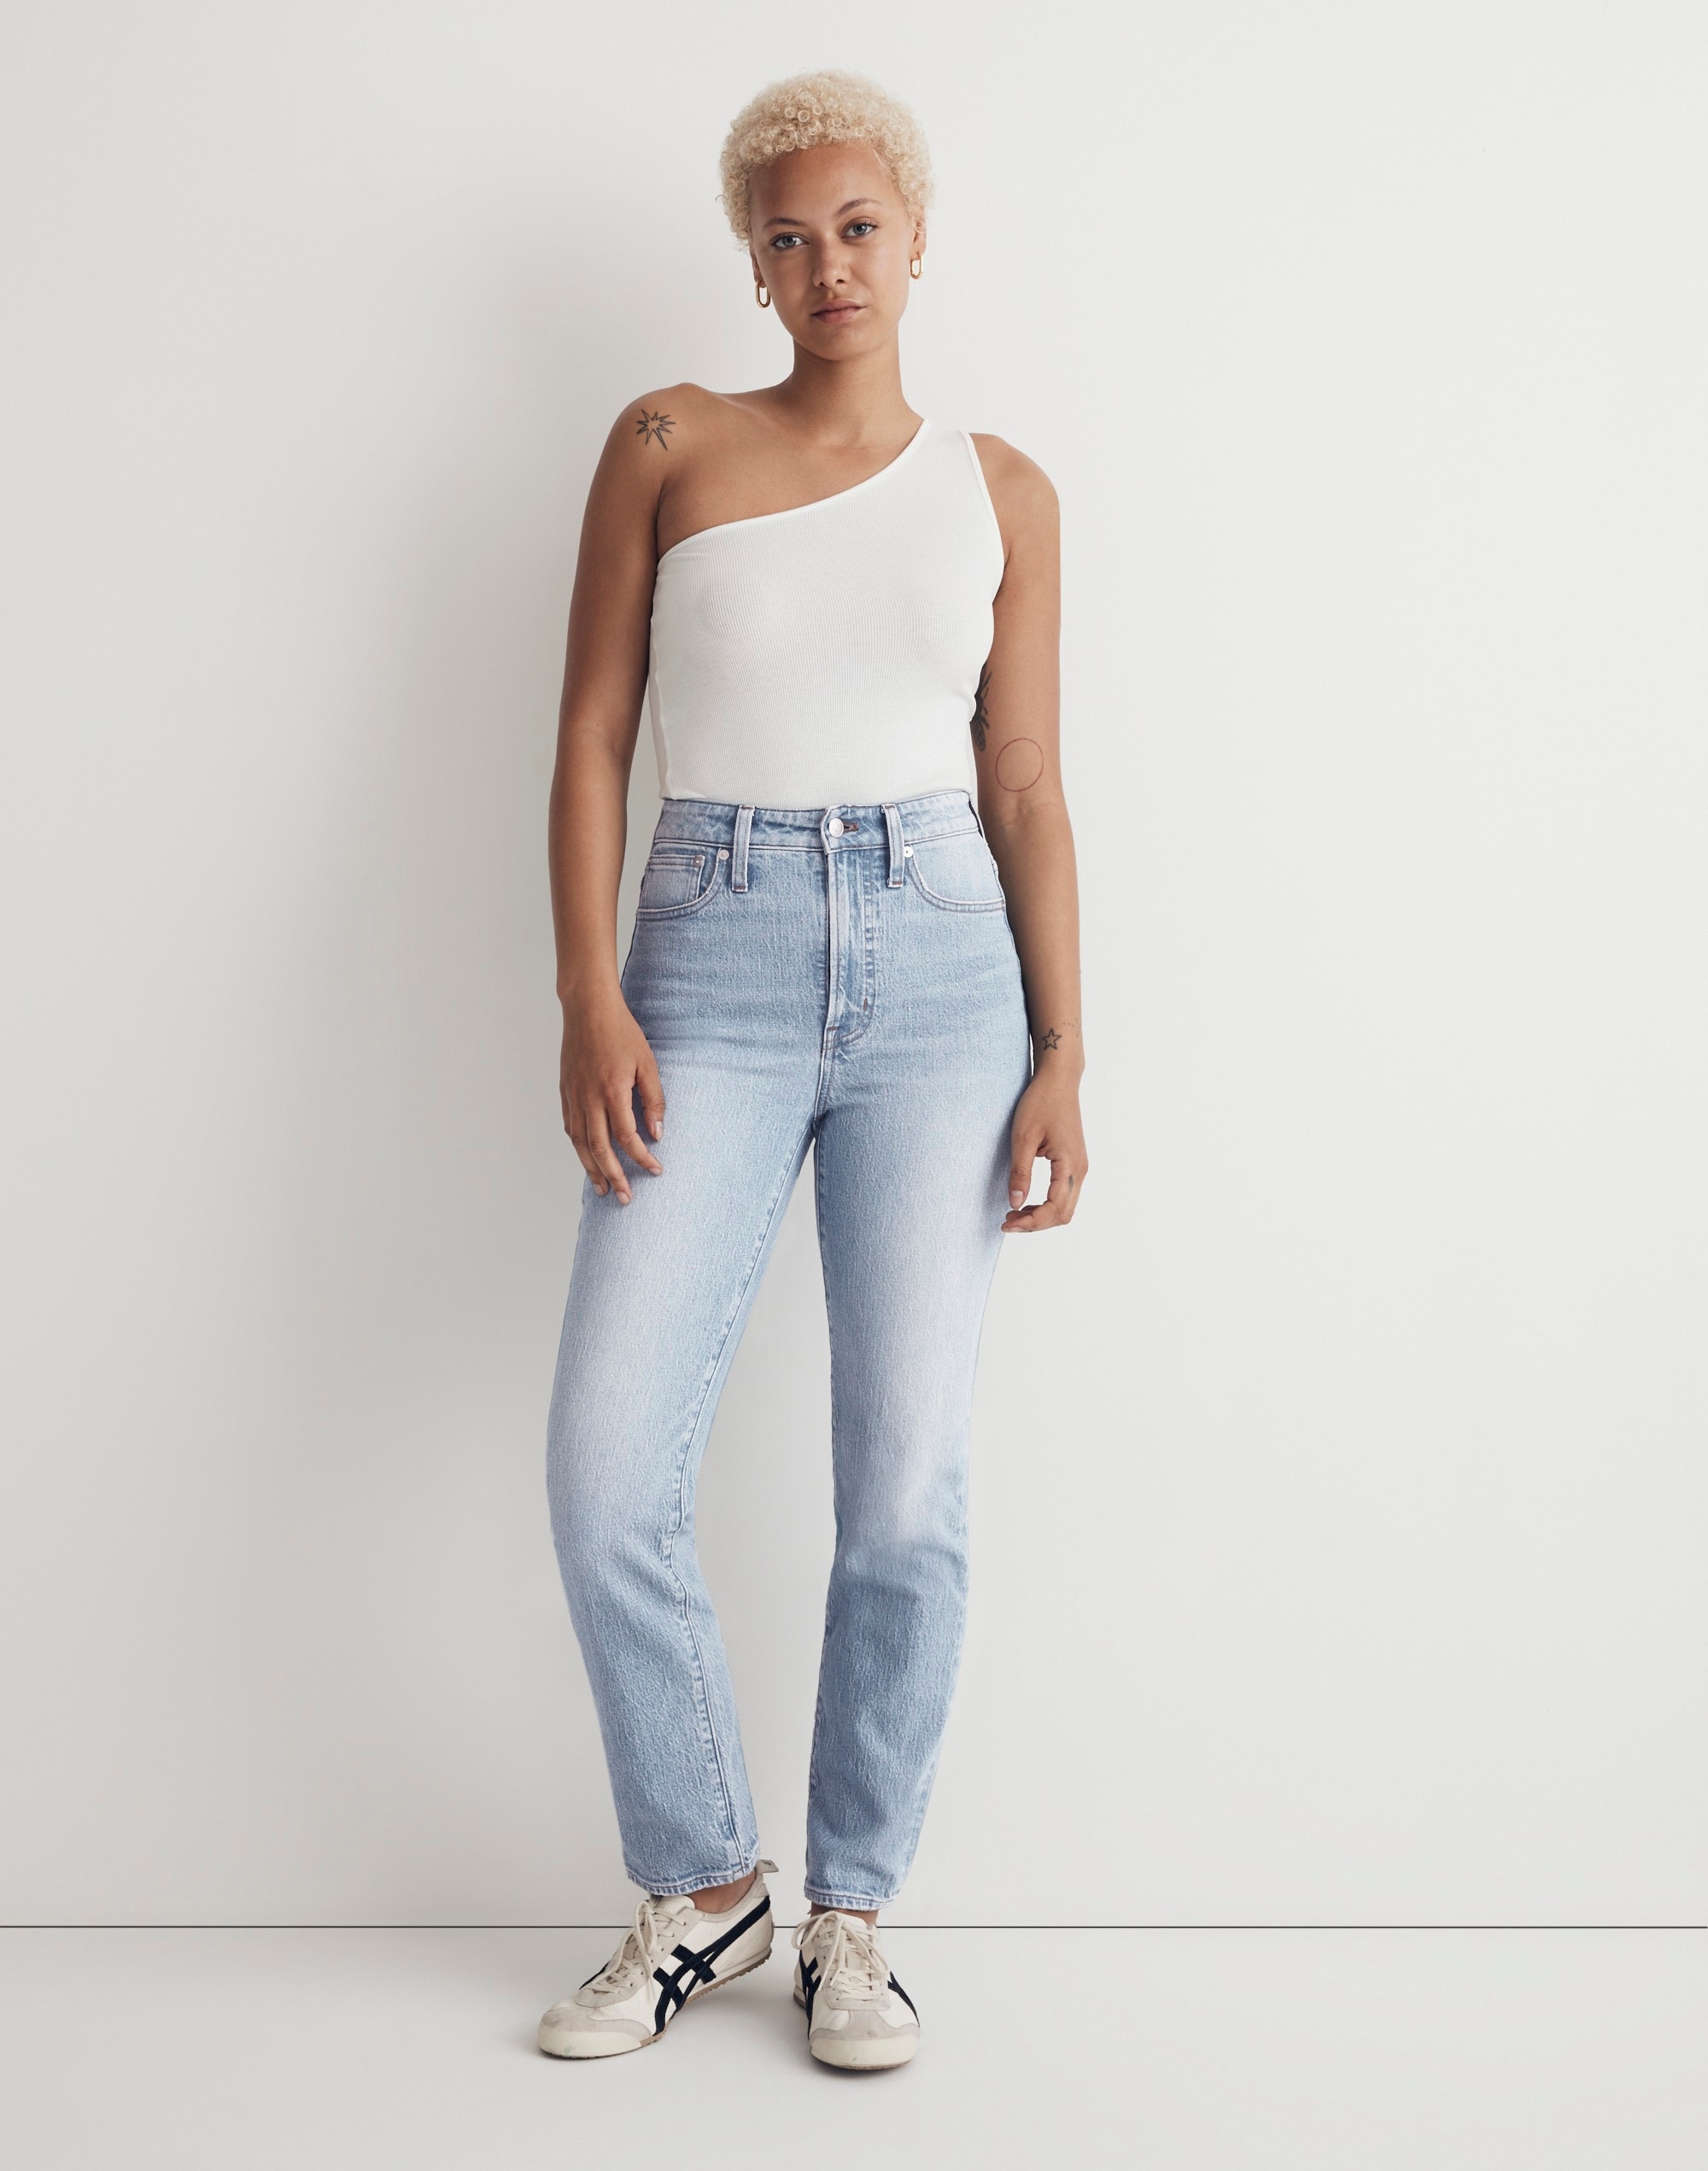 Women's Jeans Size Chart Conversion Sizing Guide, 42% OFF